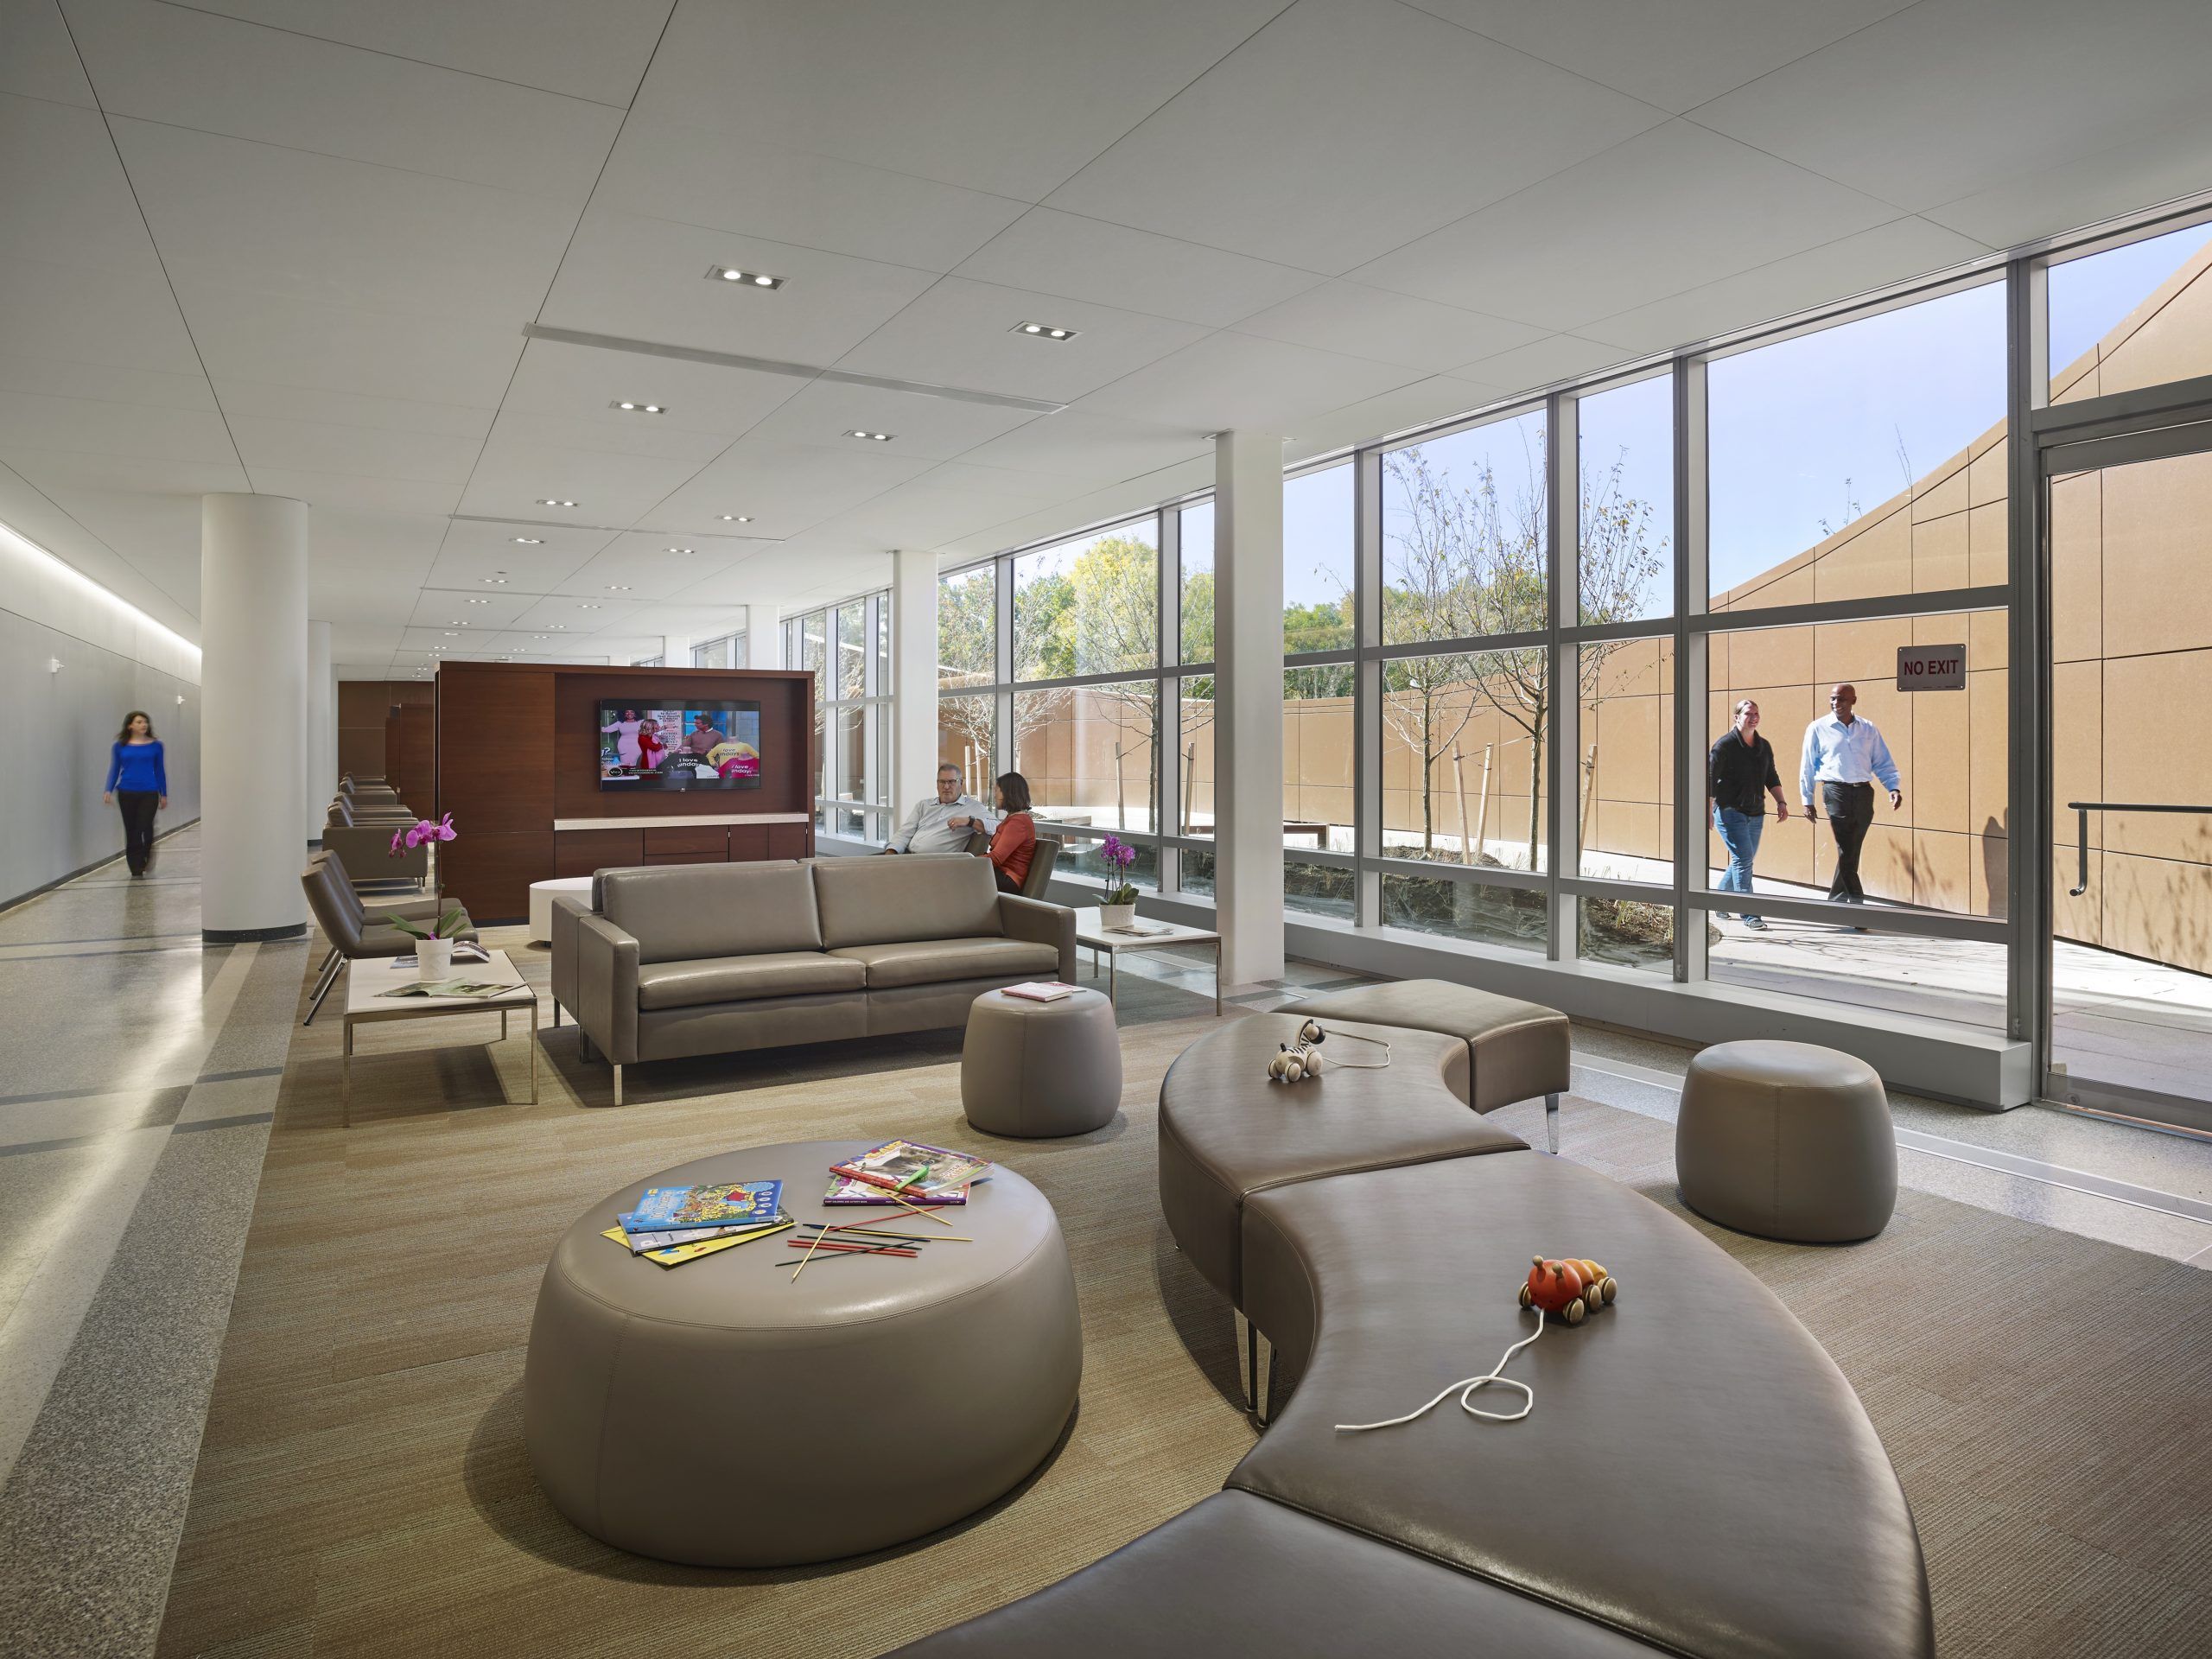 A lobby area with seating for families and children, television console, reading materials, and floor-to-ceiling windows opening onto a patio